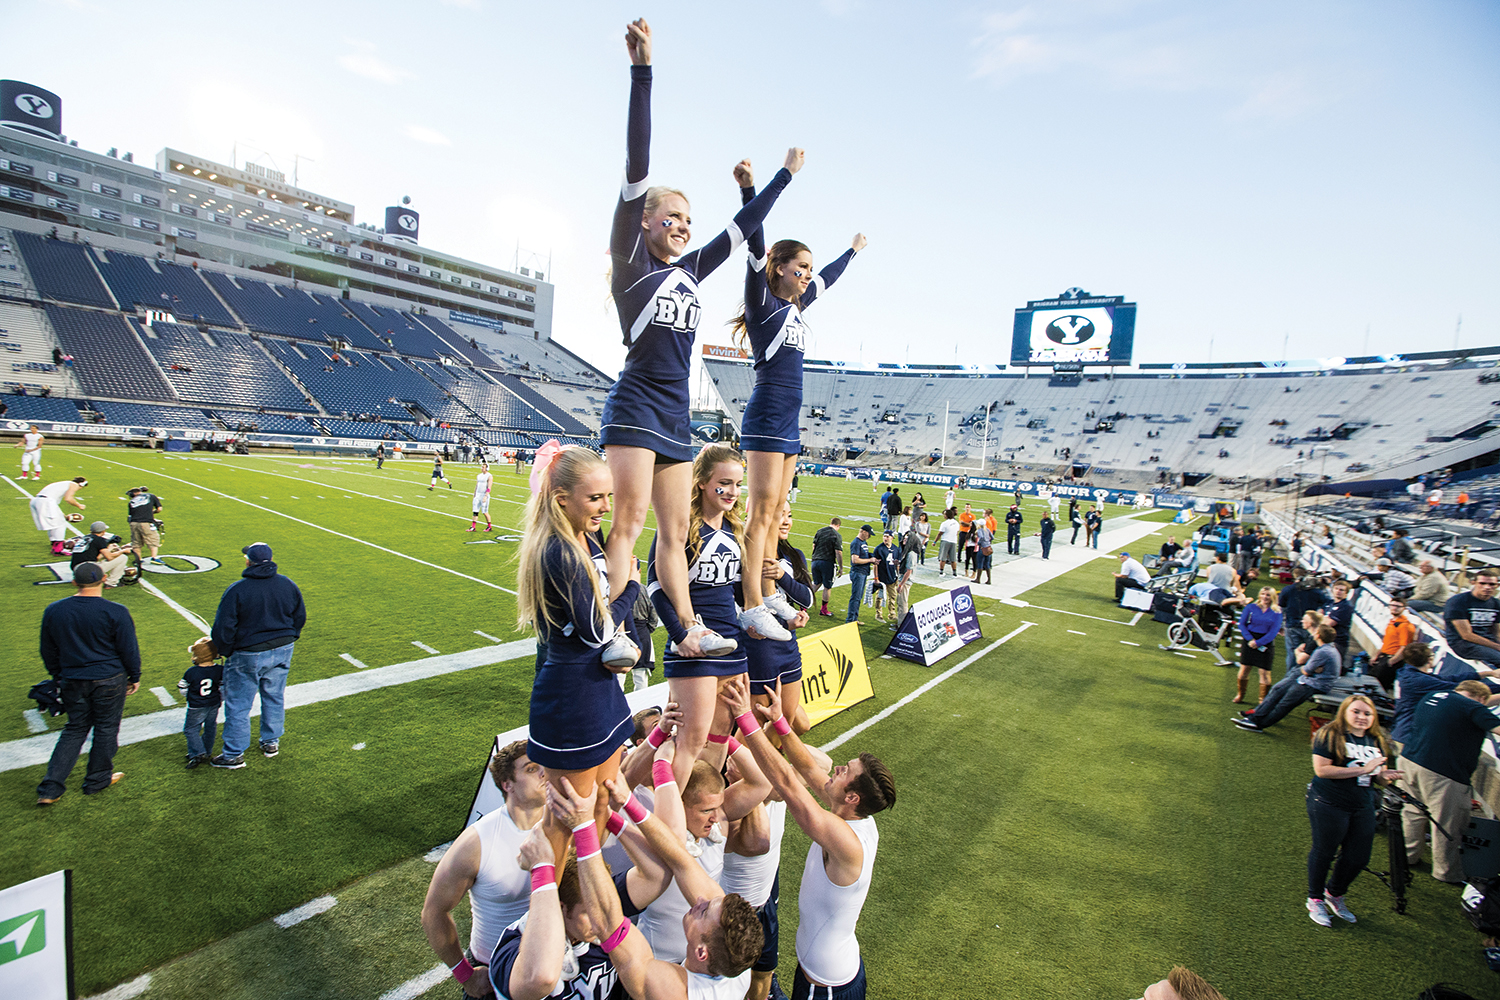 BYU cheerleaders entertain fans by forming a pyramid.